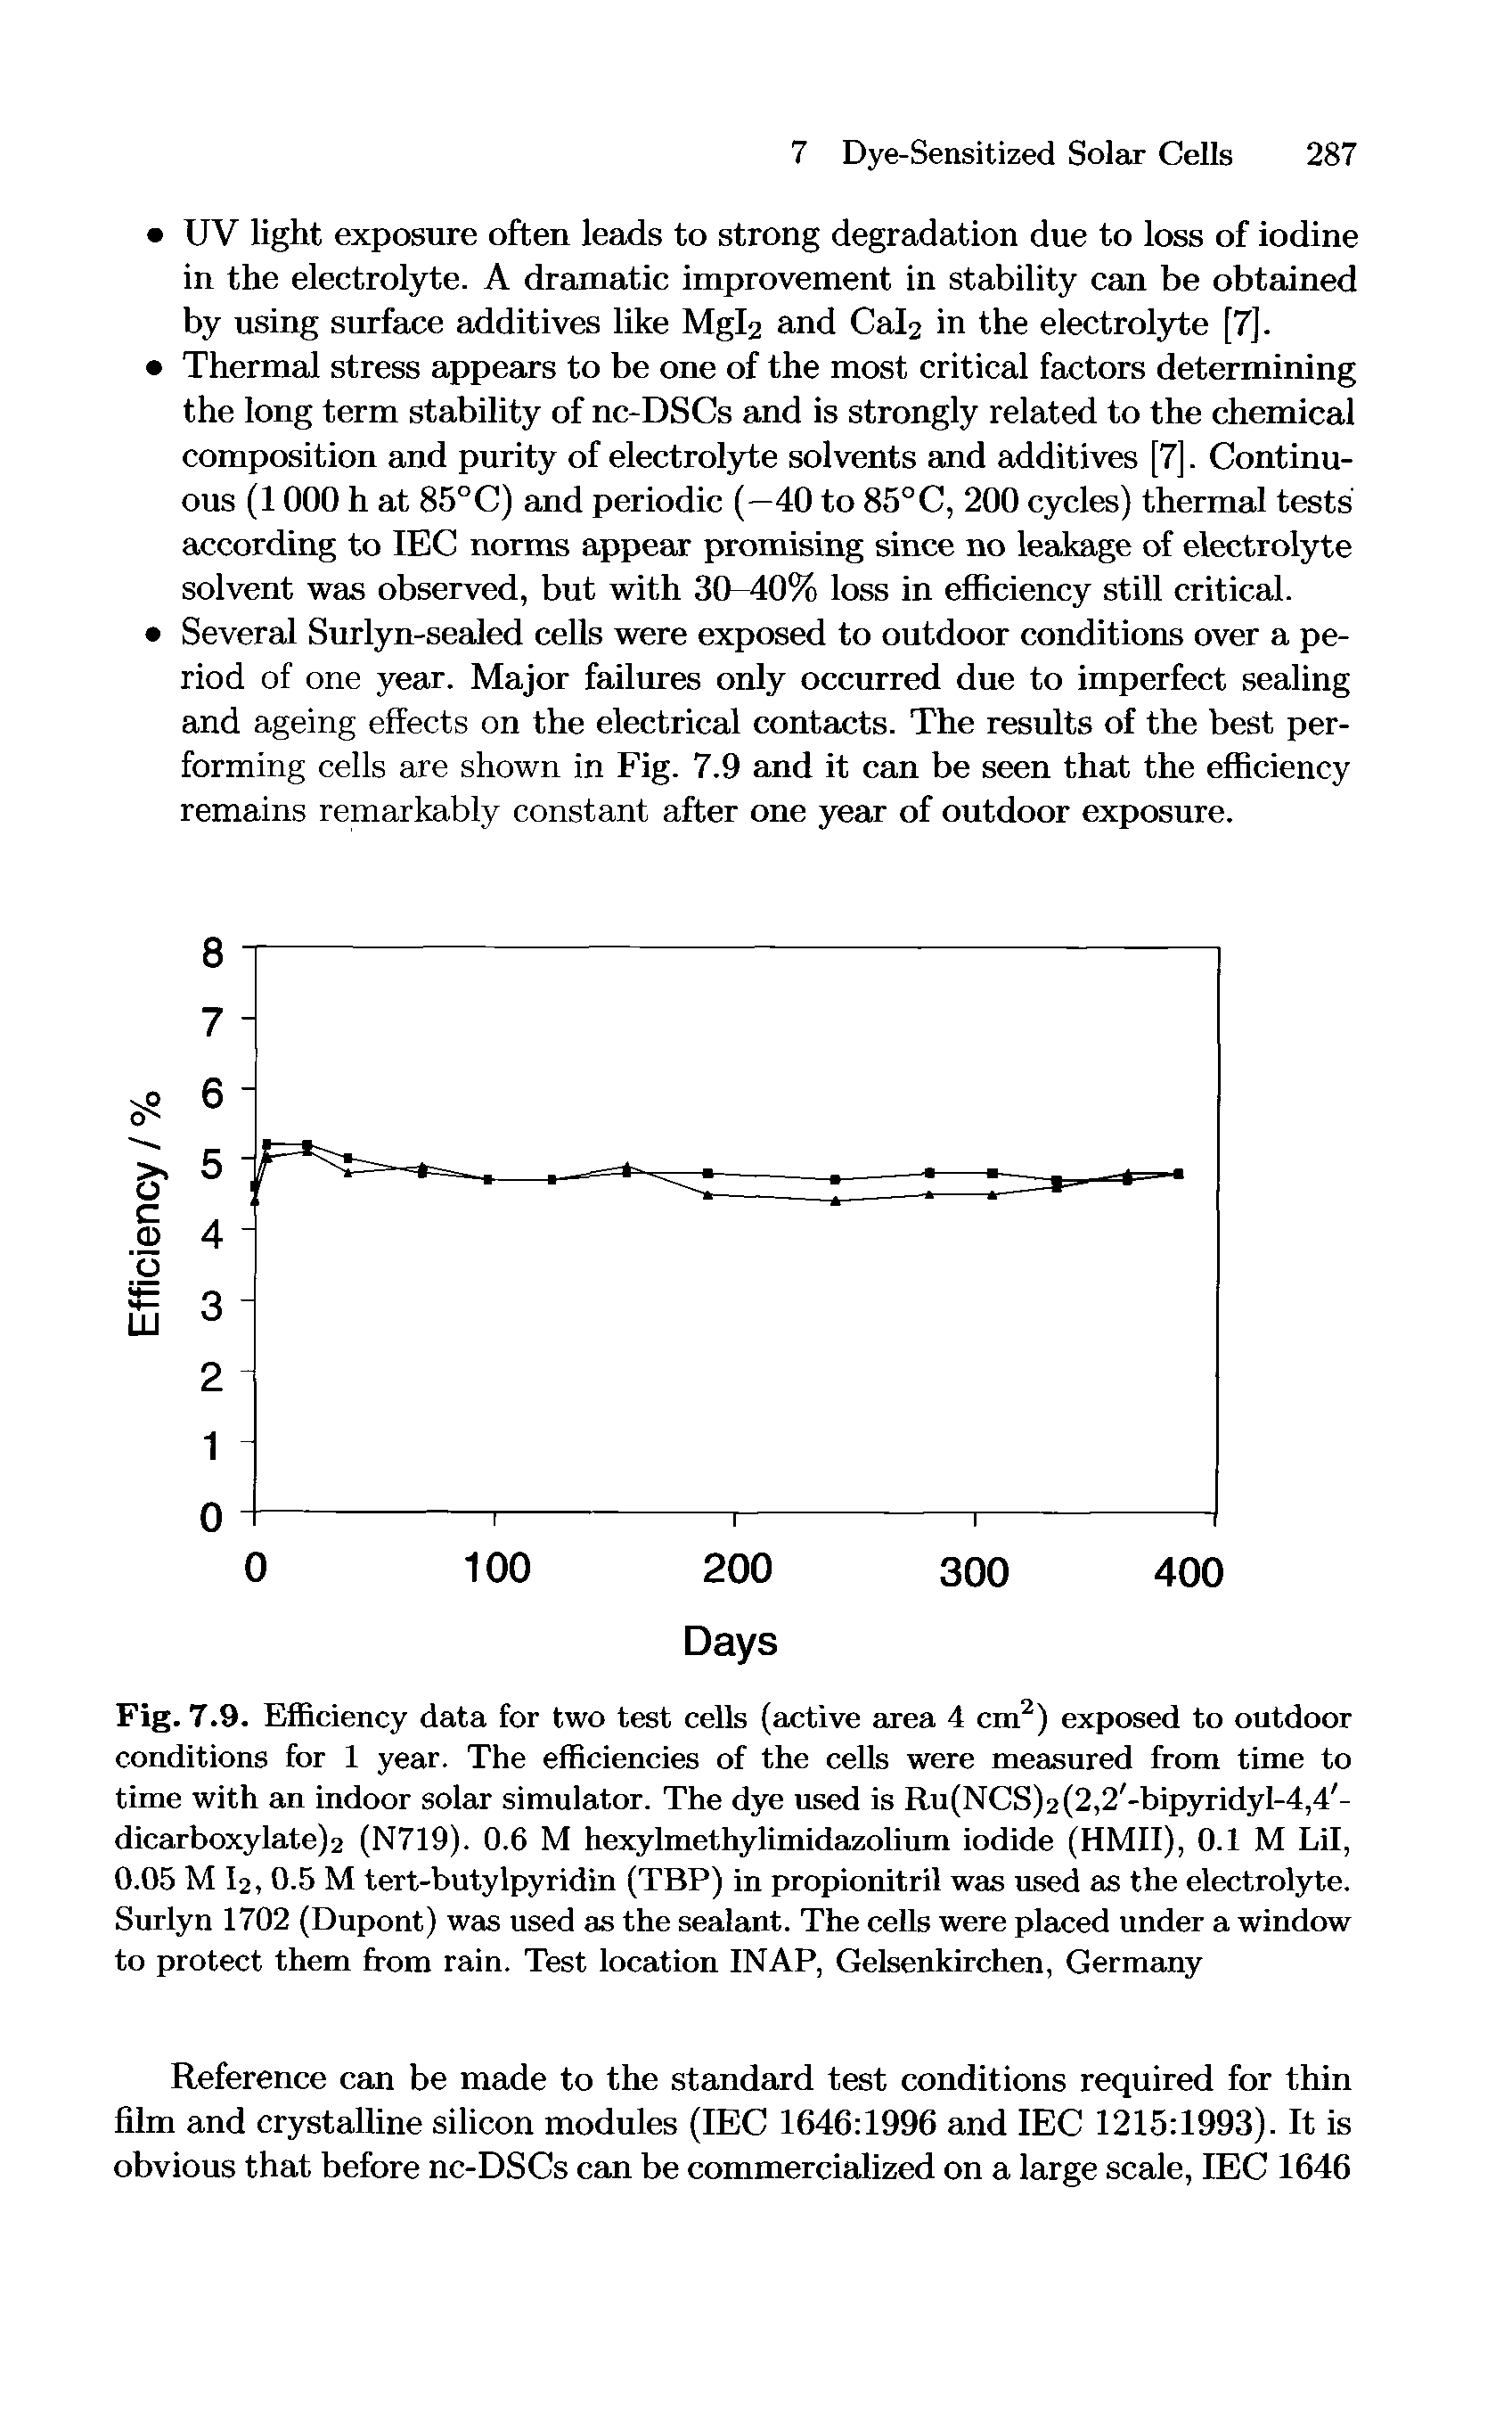 Fig. 7.9. Efficiency data for two test cells (active area 4 cm2) exposed to outdoor conditions for 1 year. The efficiencies of the cells were measured from time to time with an indoor solar simulator. The dye used is Ru(NCS)2(2,2 -bipyridyl-4,4 -dicarboxylate)2 (N719). 0.6 M hexylmethylimidazolium iodide (HMII), 0.1 M Lil, 0.05 M I2, 0.5 M tert-butylpyridin (TBP) in propionitril was used as the electrolyte. Surlyn 1702 (Dupont) was used as the sealant. The cells were placed under a window to protect them from rain. Test location INAP, Gelsenkirchen, Germany...